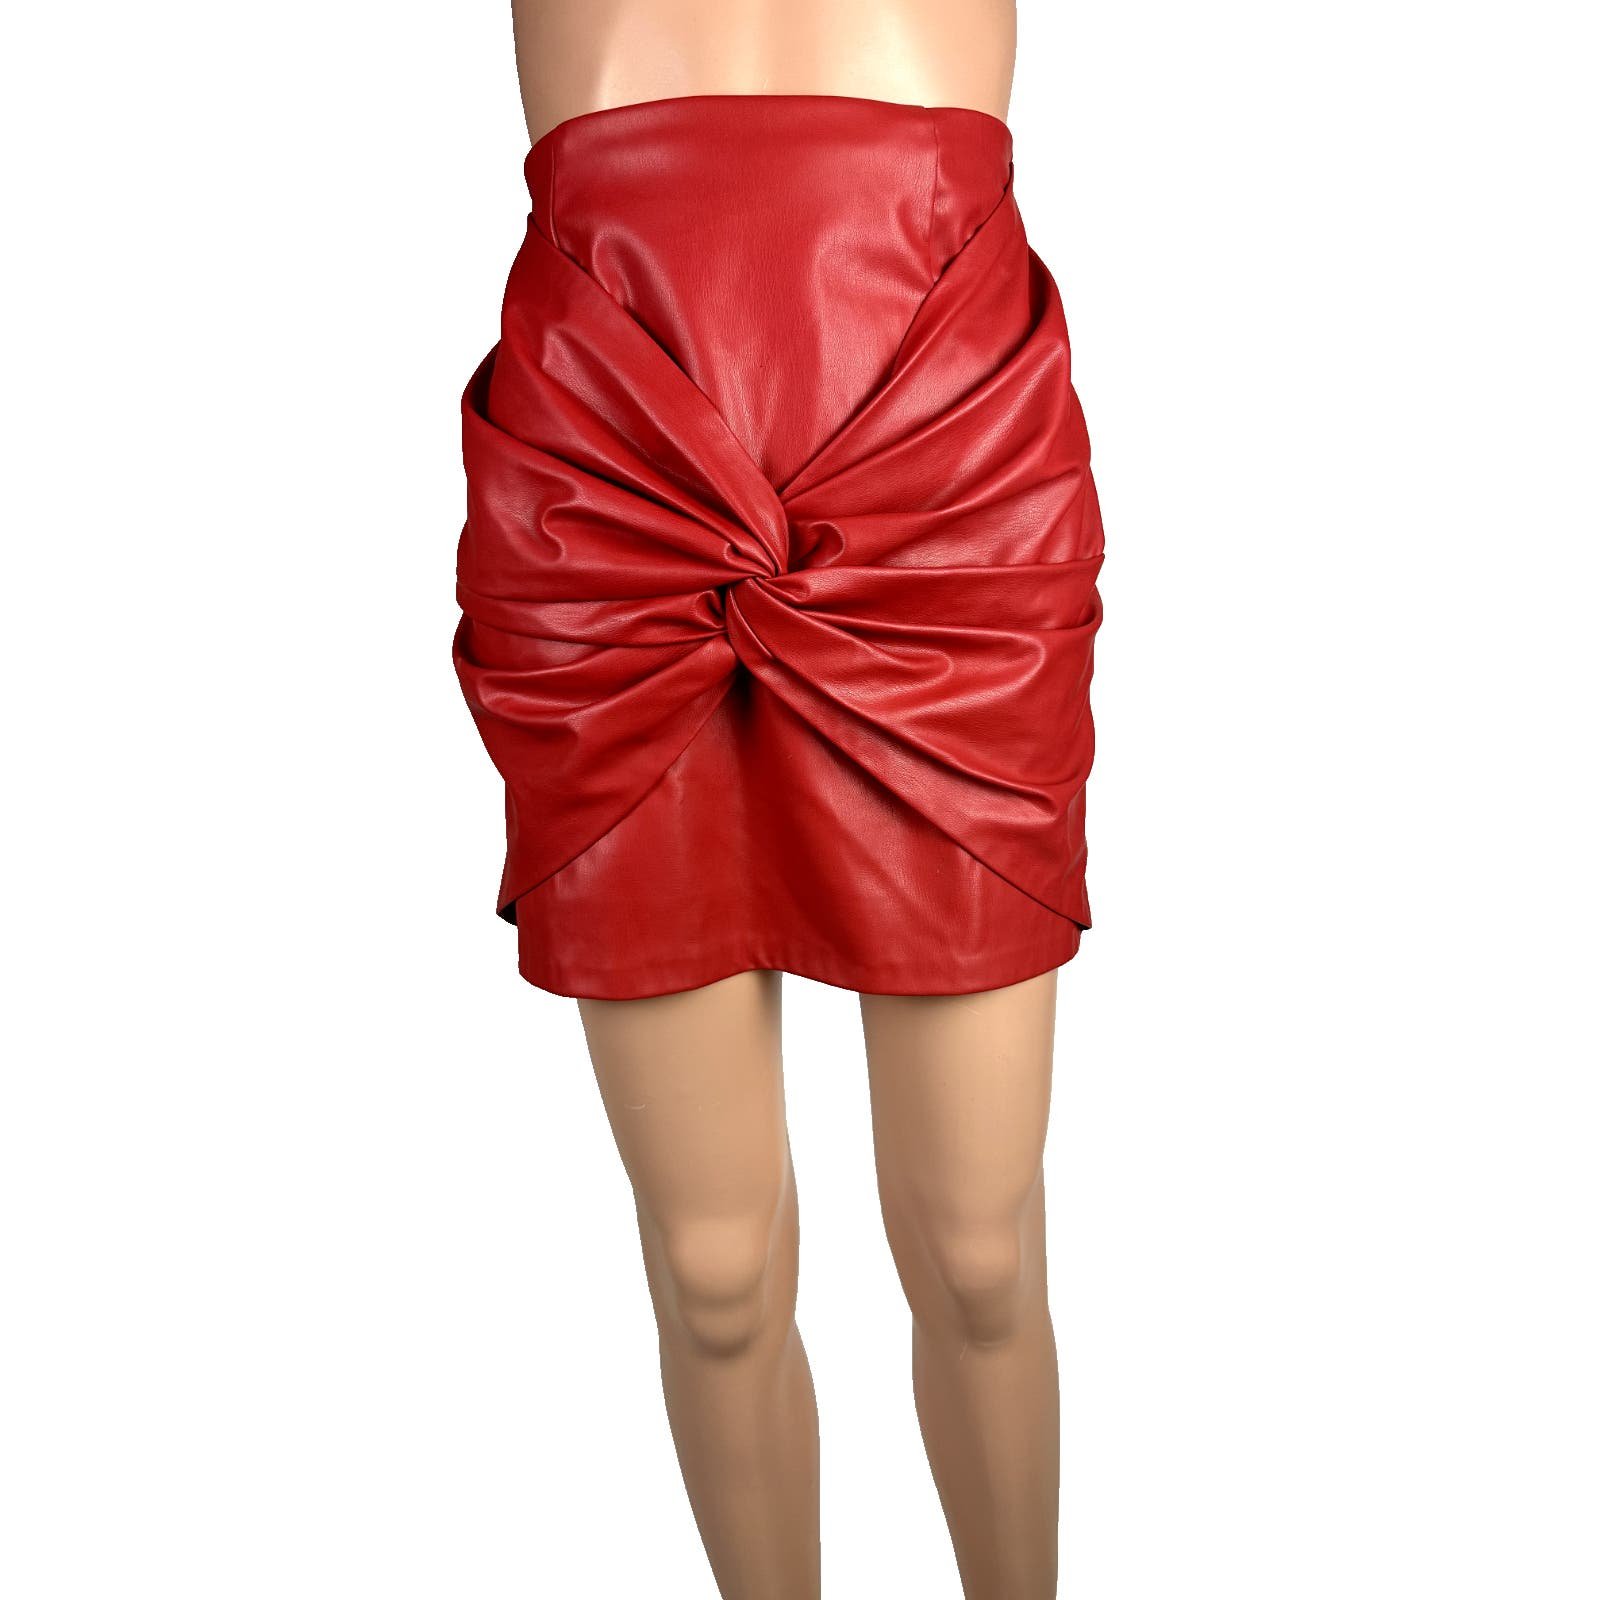 Cheap ZARA Size Large Faux Leather Knotted Front Mini Skirt Red New Without Tags IADSZlyLD Discount